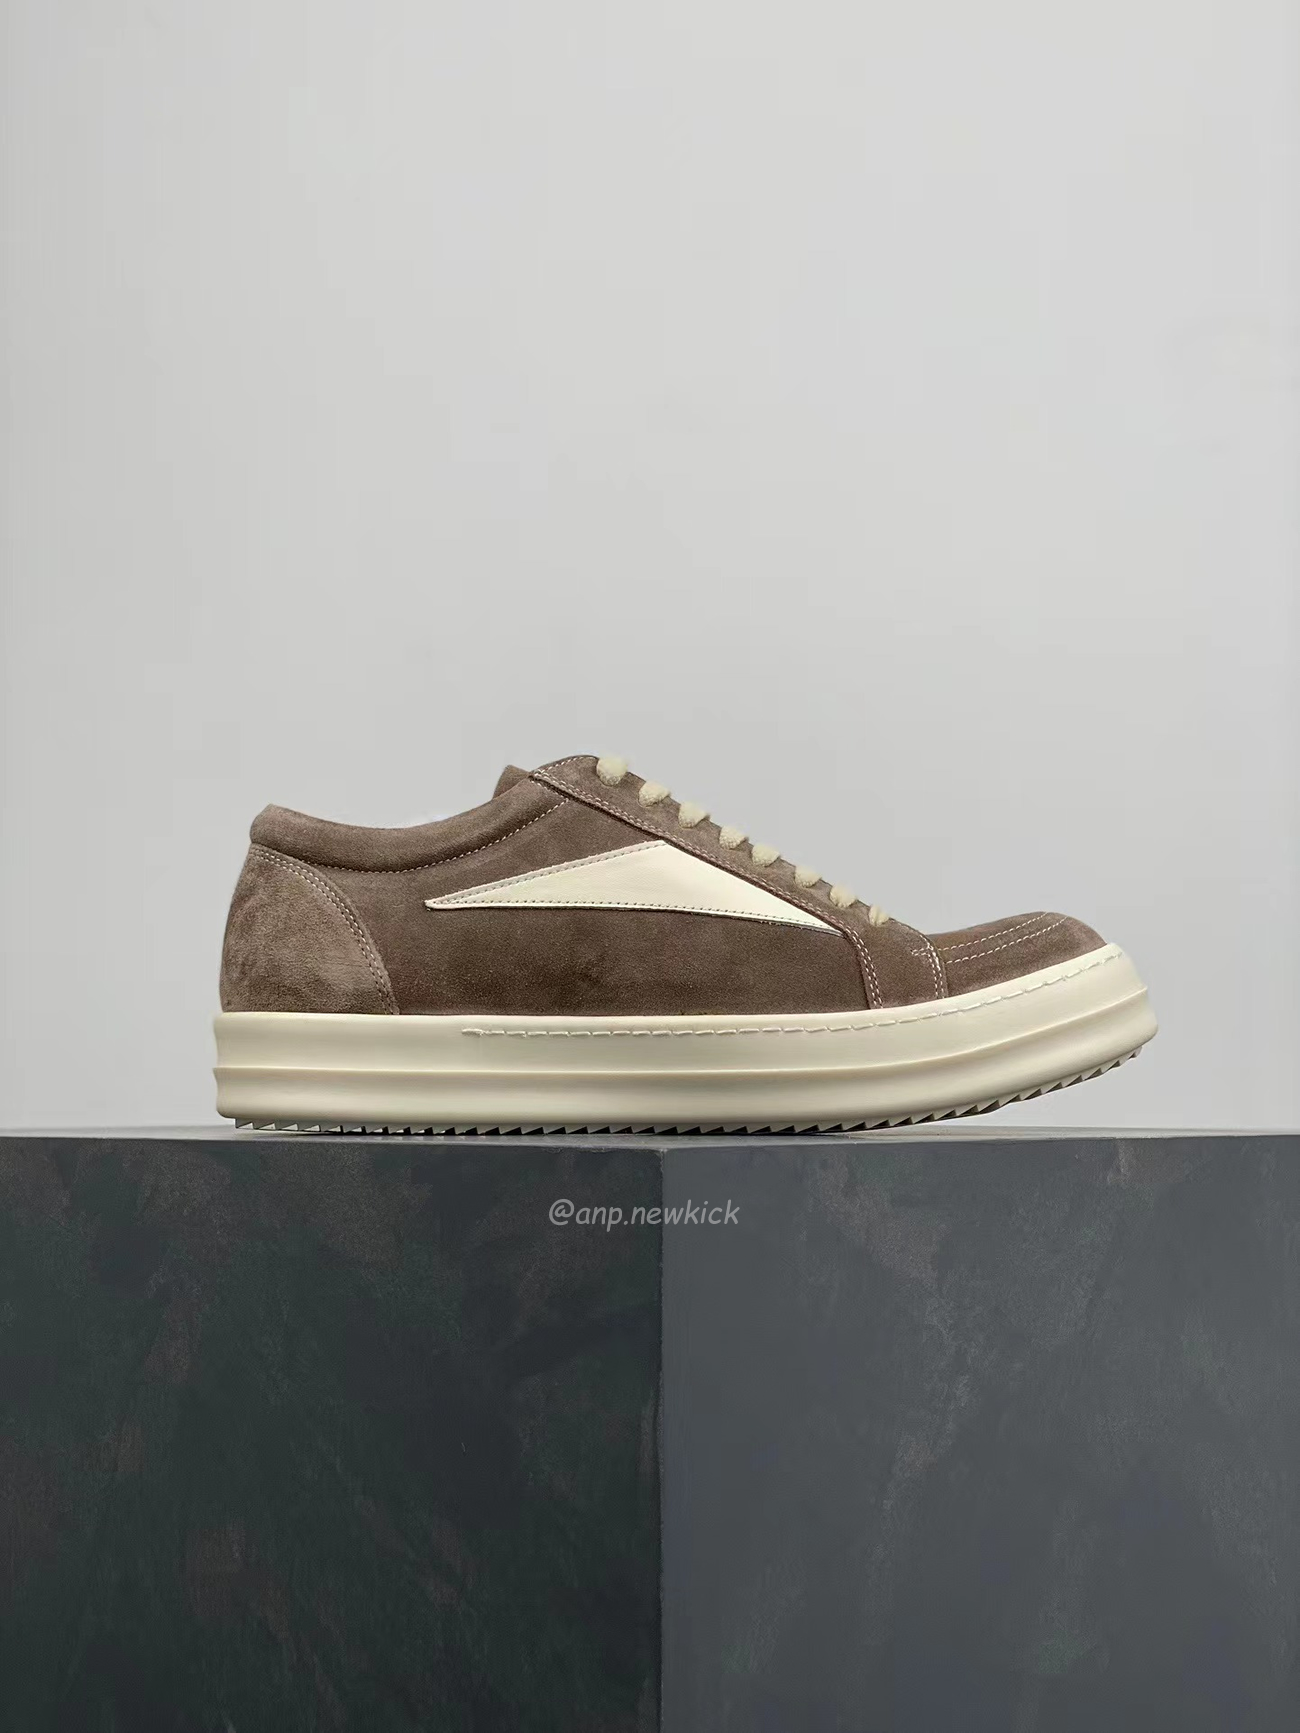 Rick Owens Leather Low Top Vintage Sneakers Suede Canvas Black Taupe Grey Faded Pnk Pearl Milk Dark Dust (9) - newkick.org